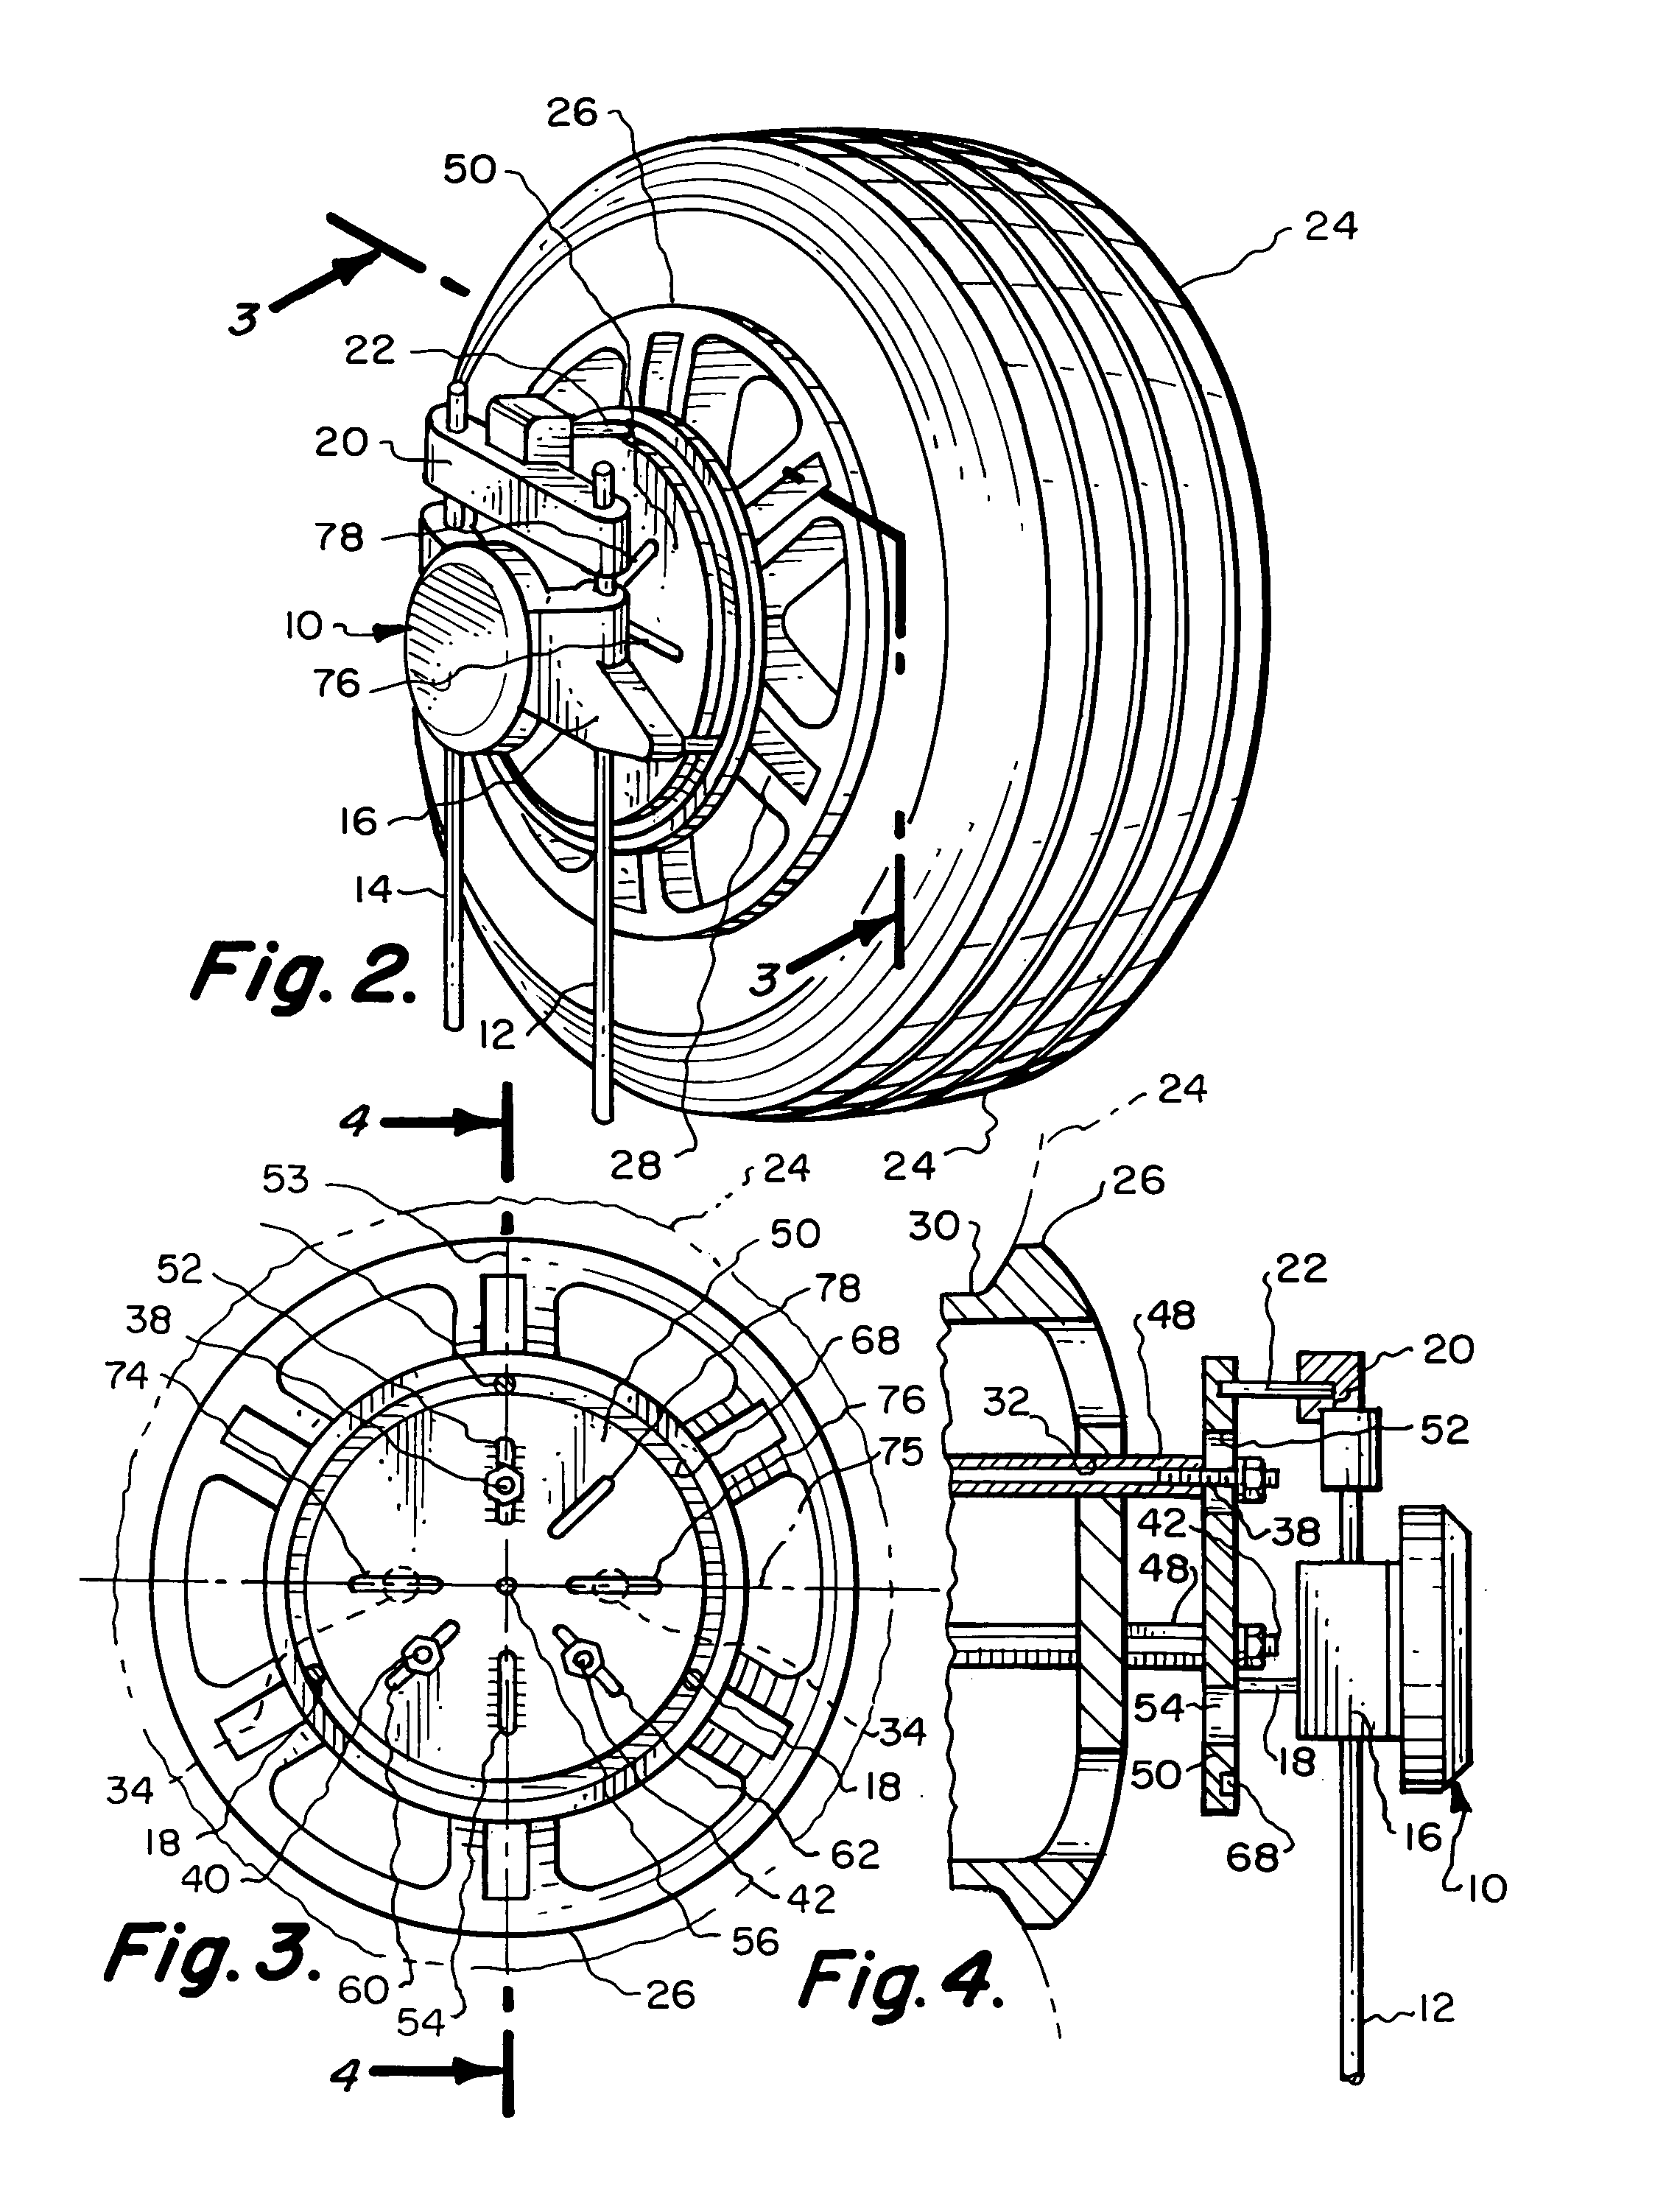 Mounting system for mounting an alignment instrument on a vehicular wheel that uses any known lug bolt pattern